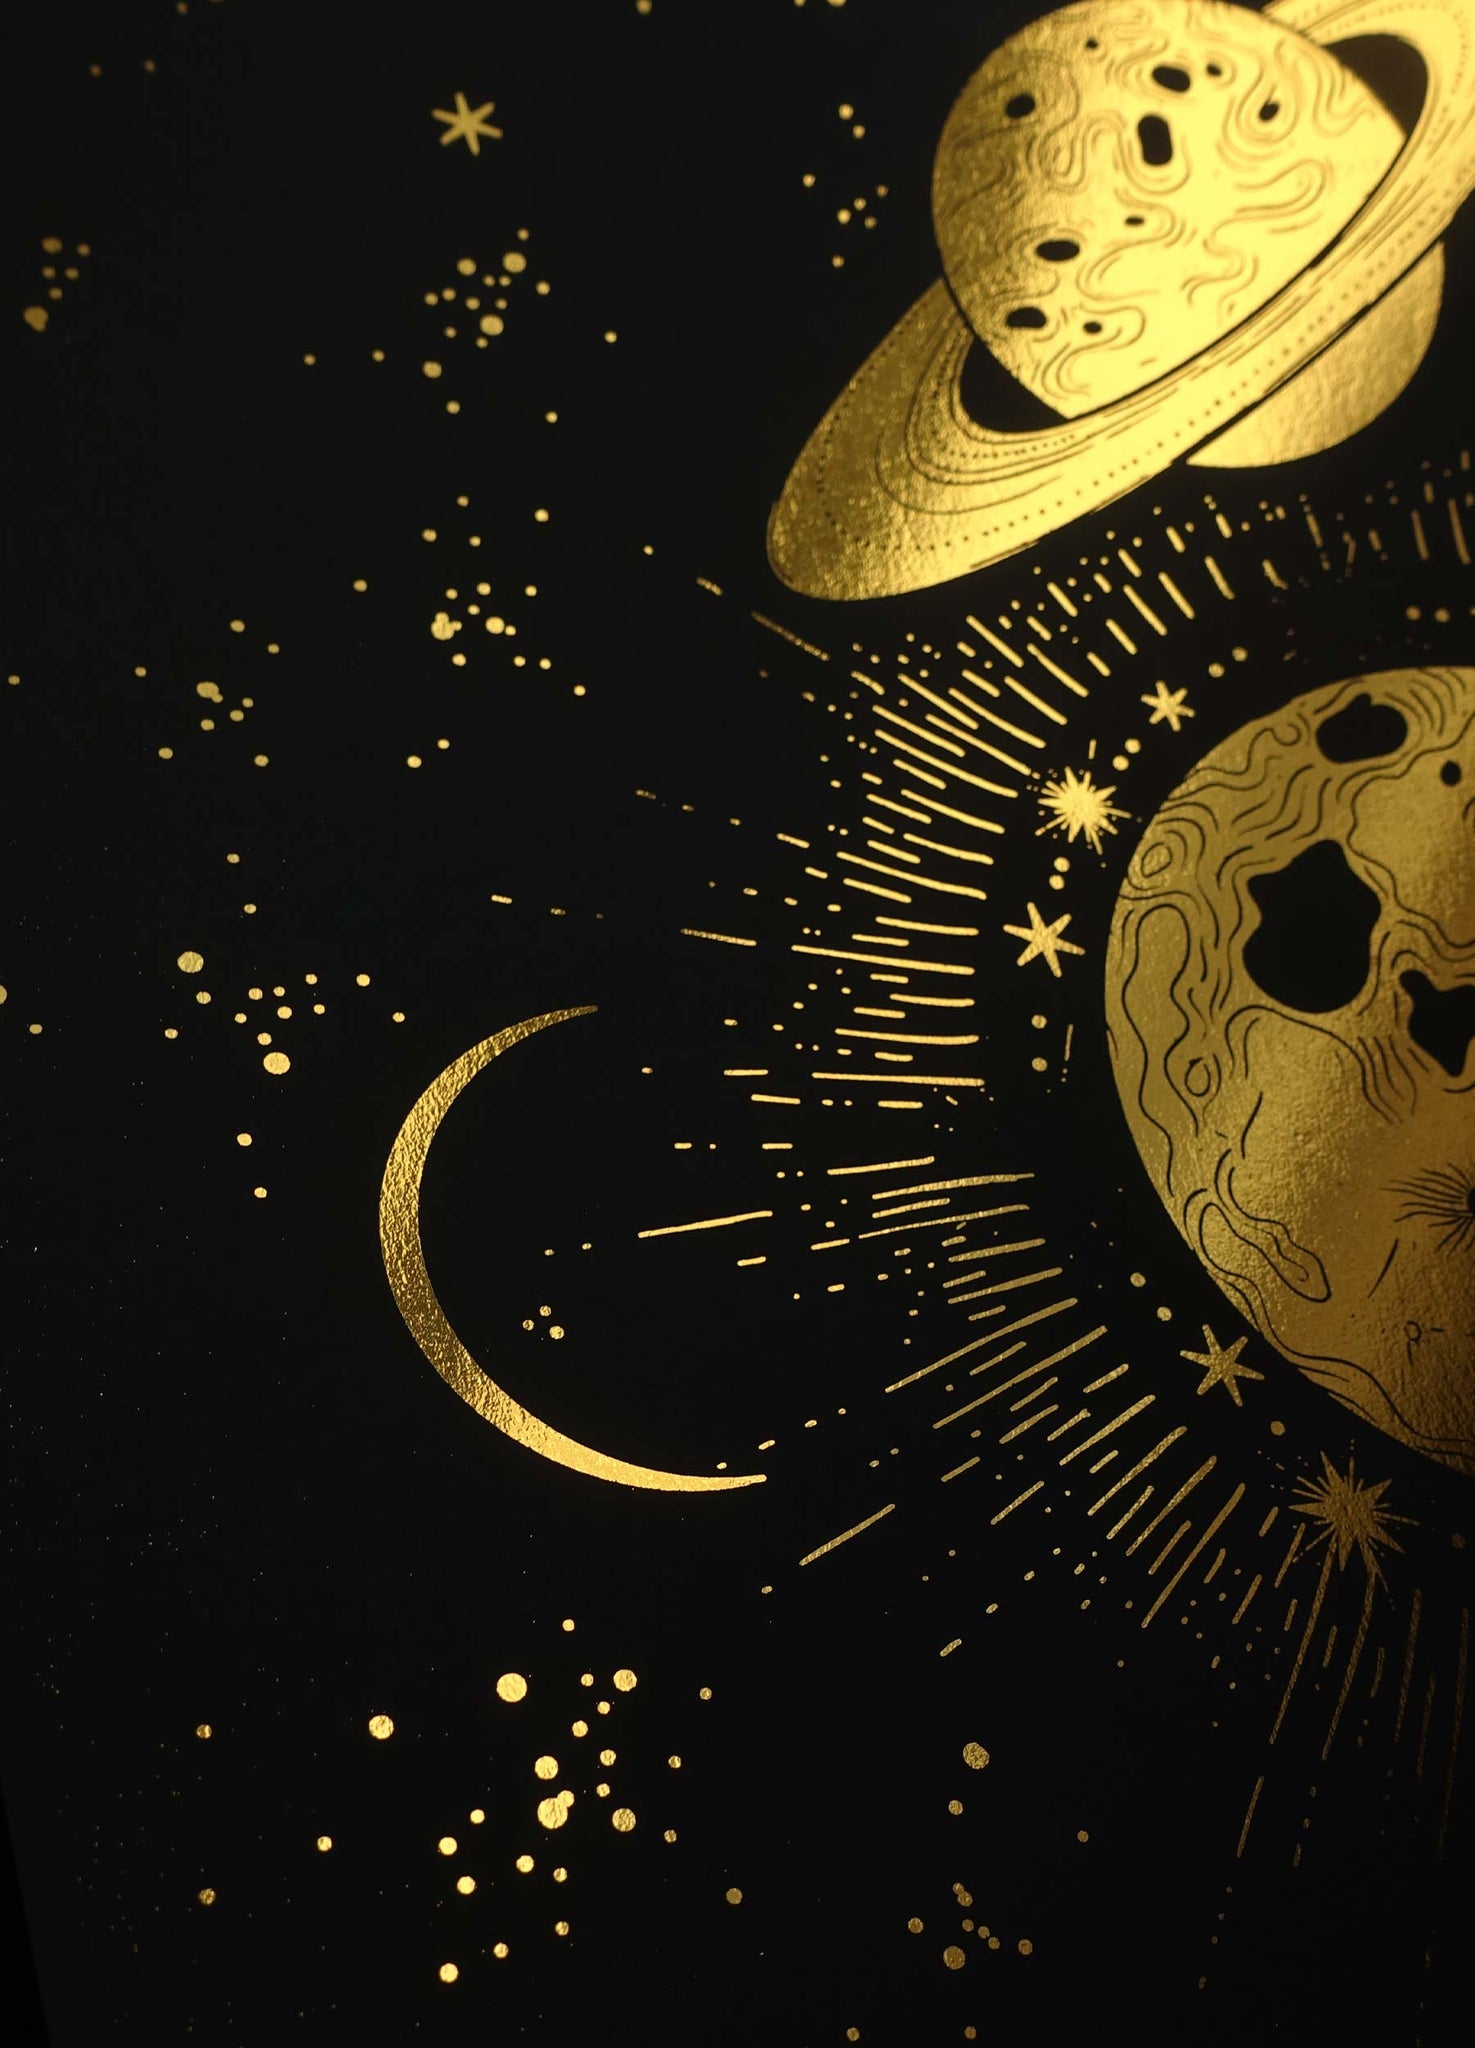 The Great Conjunction with Saturn and Jupiter and moon gold foil art print on black paper by Cocorrina & Co